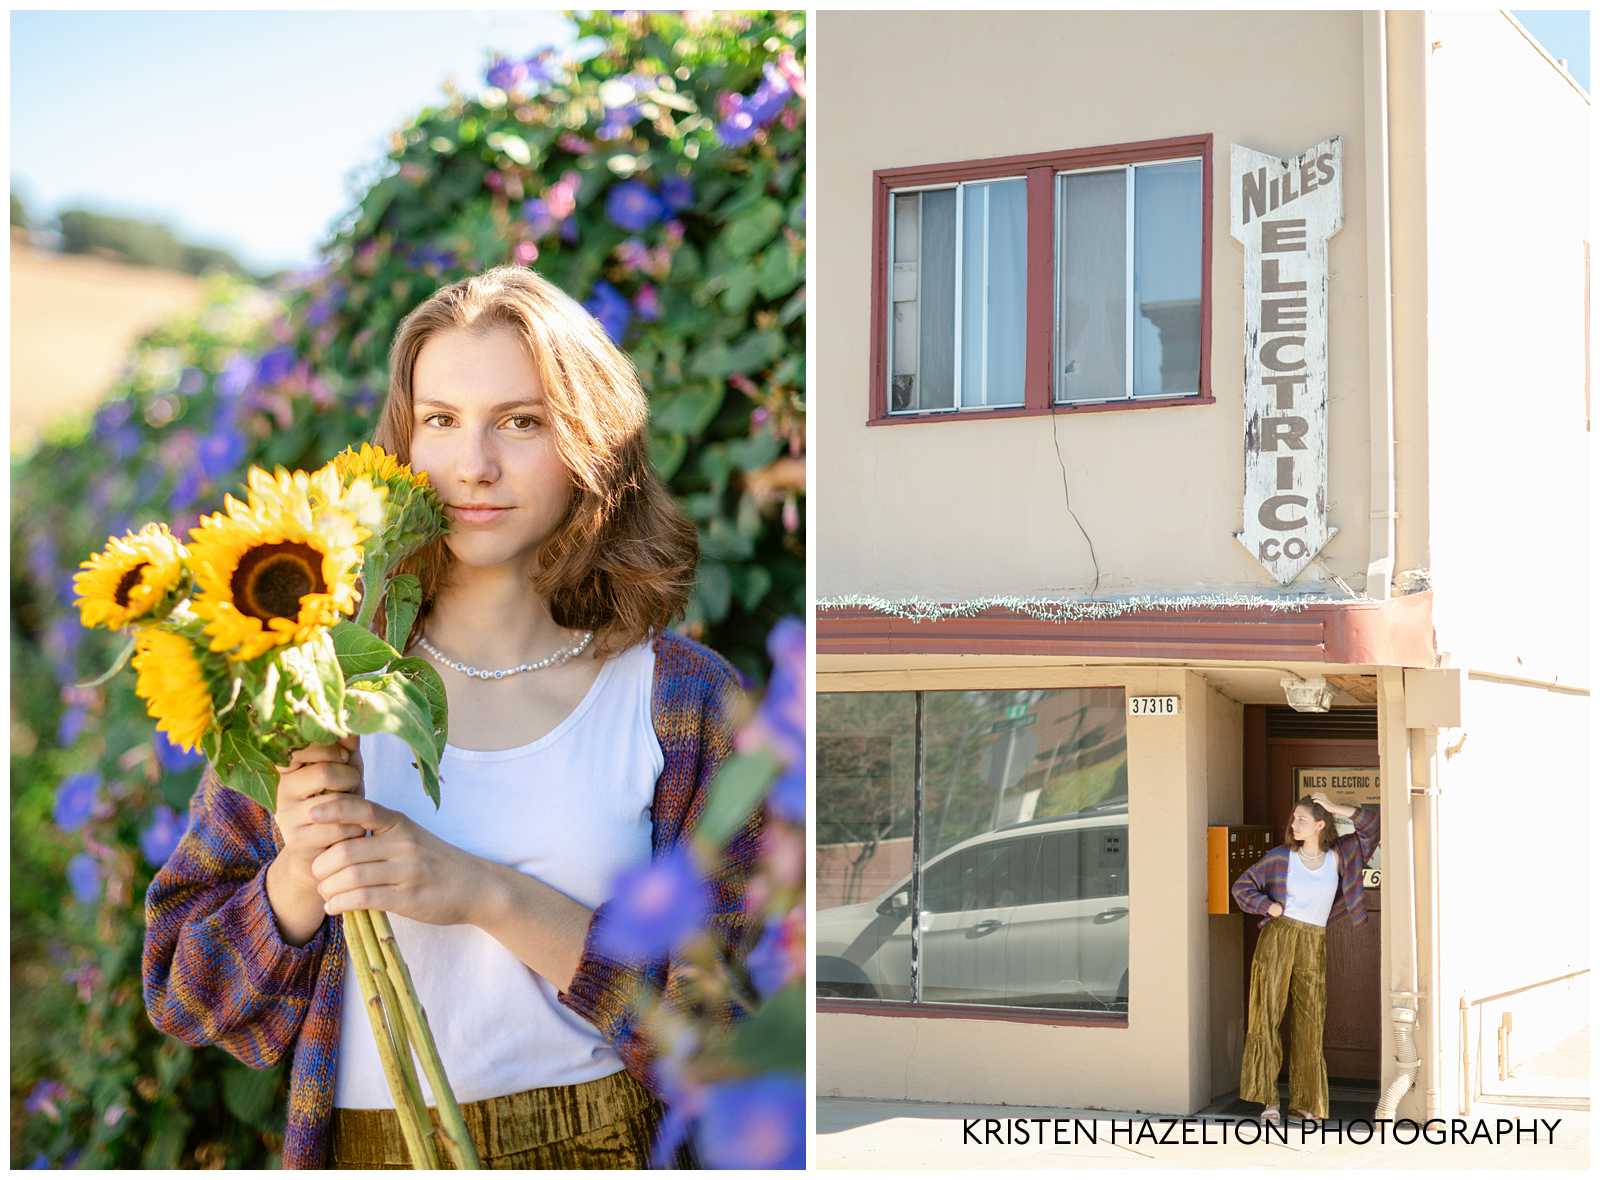 High school senior girl holding sunflowers close to her face while standing in front of a fence covered in morning glory flowers in Niles in Fremont, California